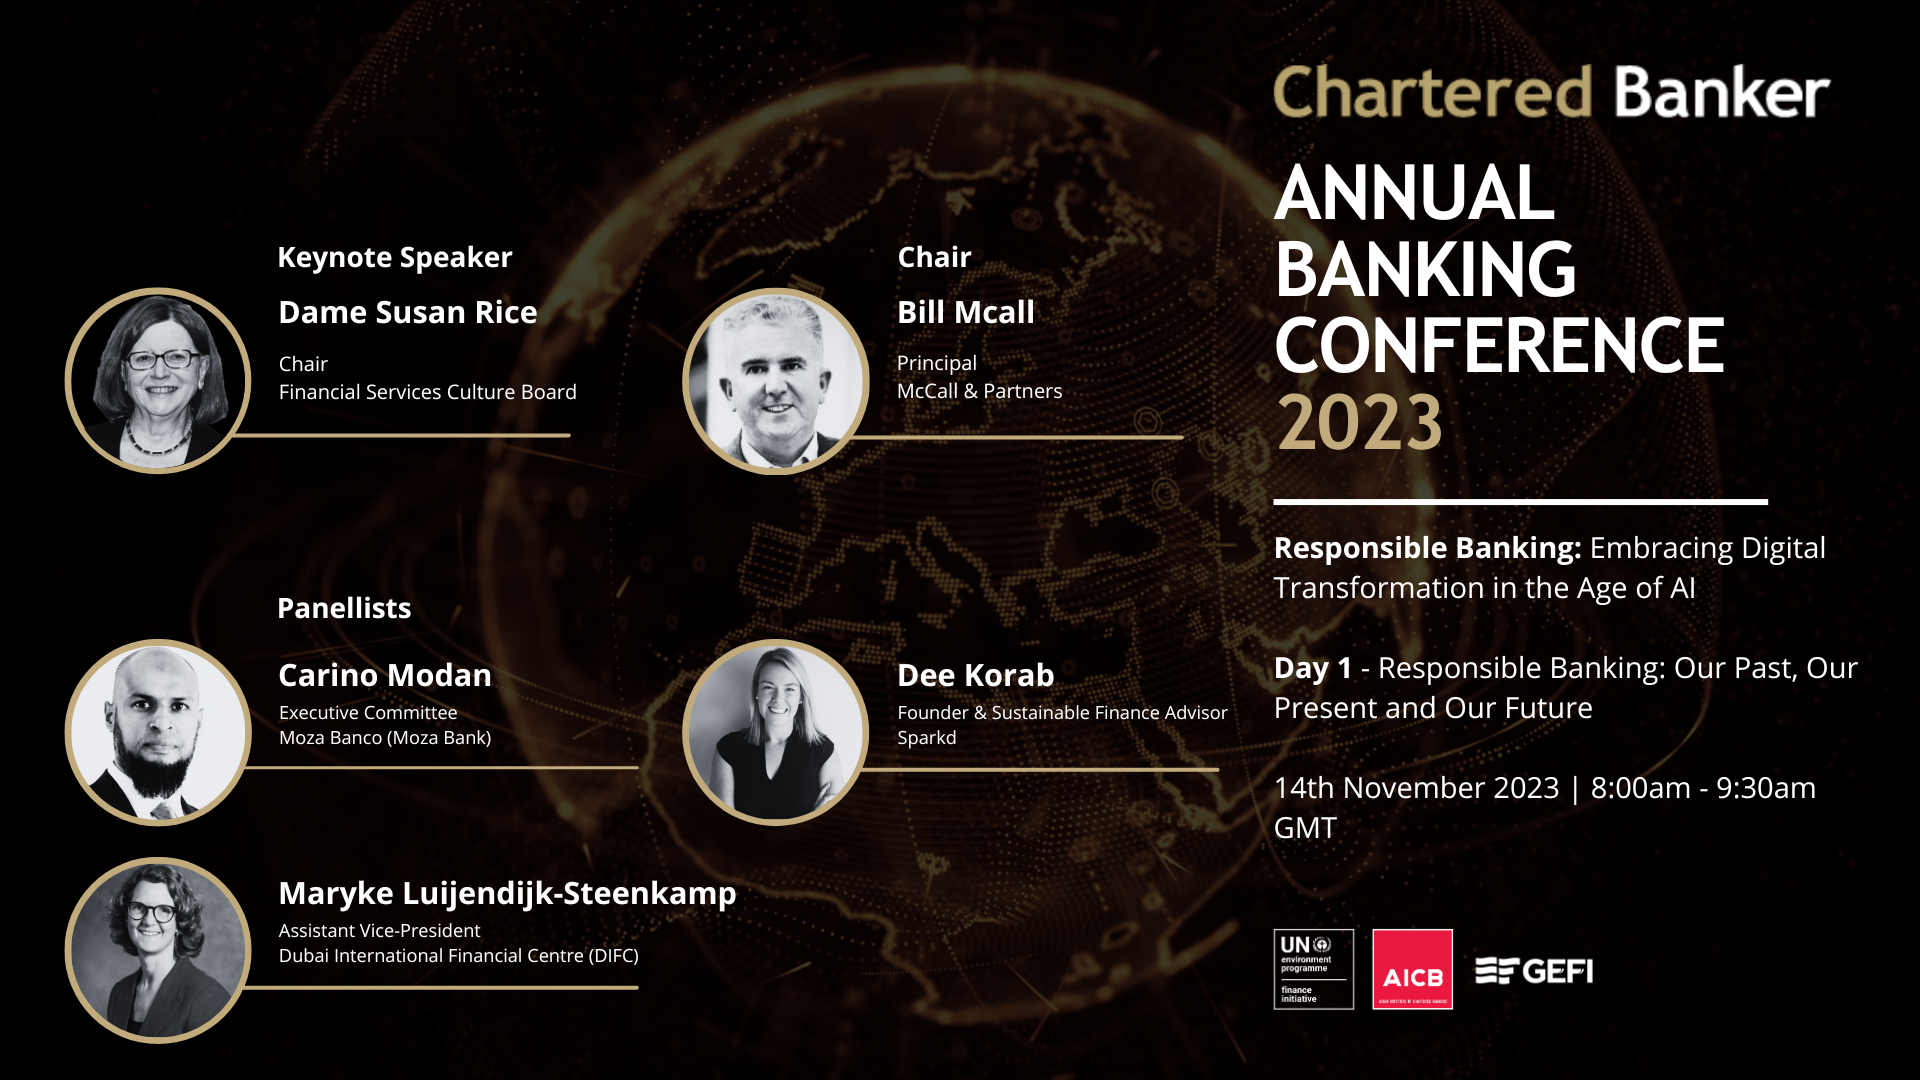 Annual Banking Conference 2023 - Day 1 -Responsible Banking: Our Past, Our Present and Our Future 